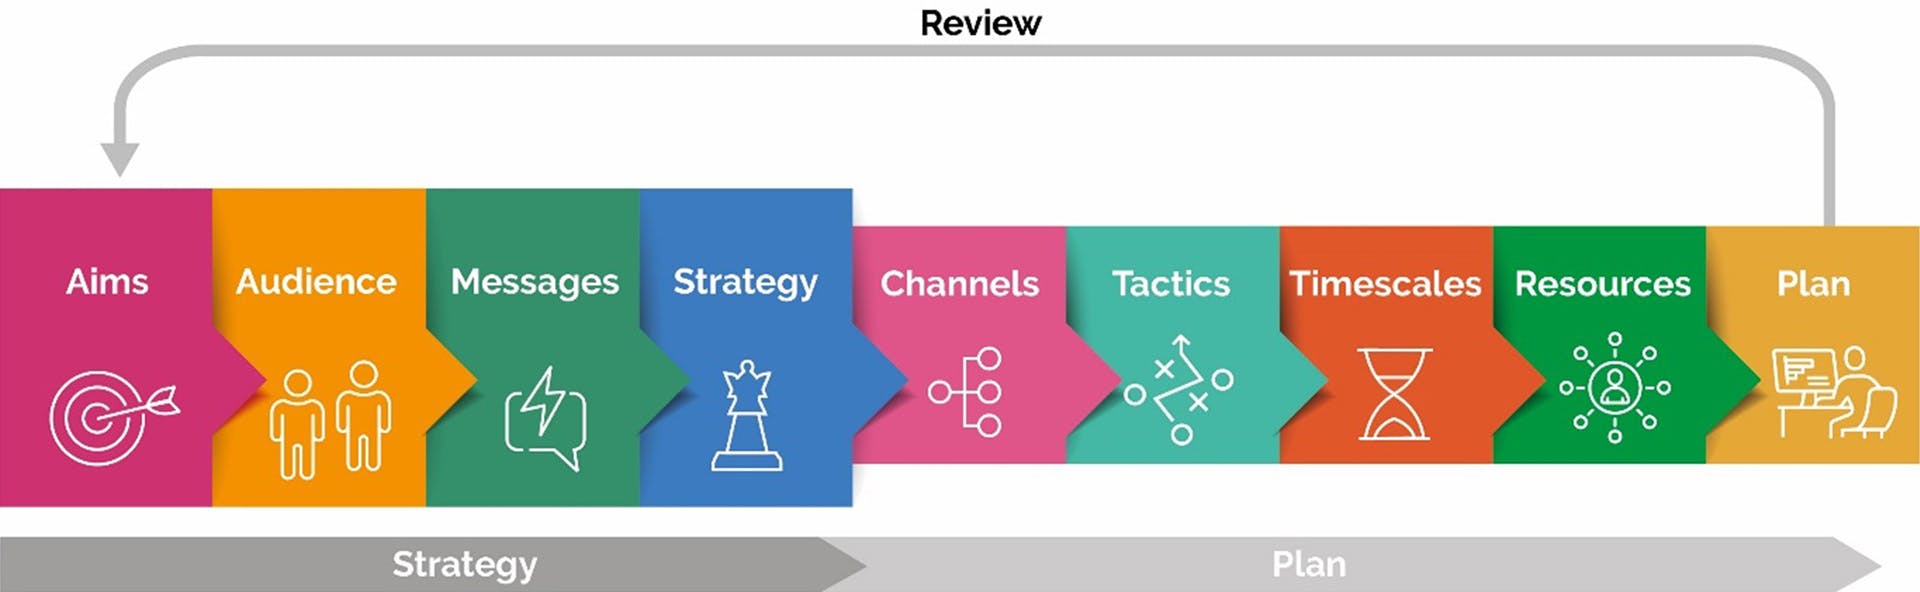 Review strategy image